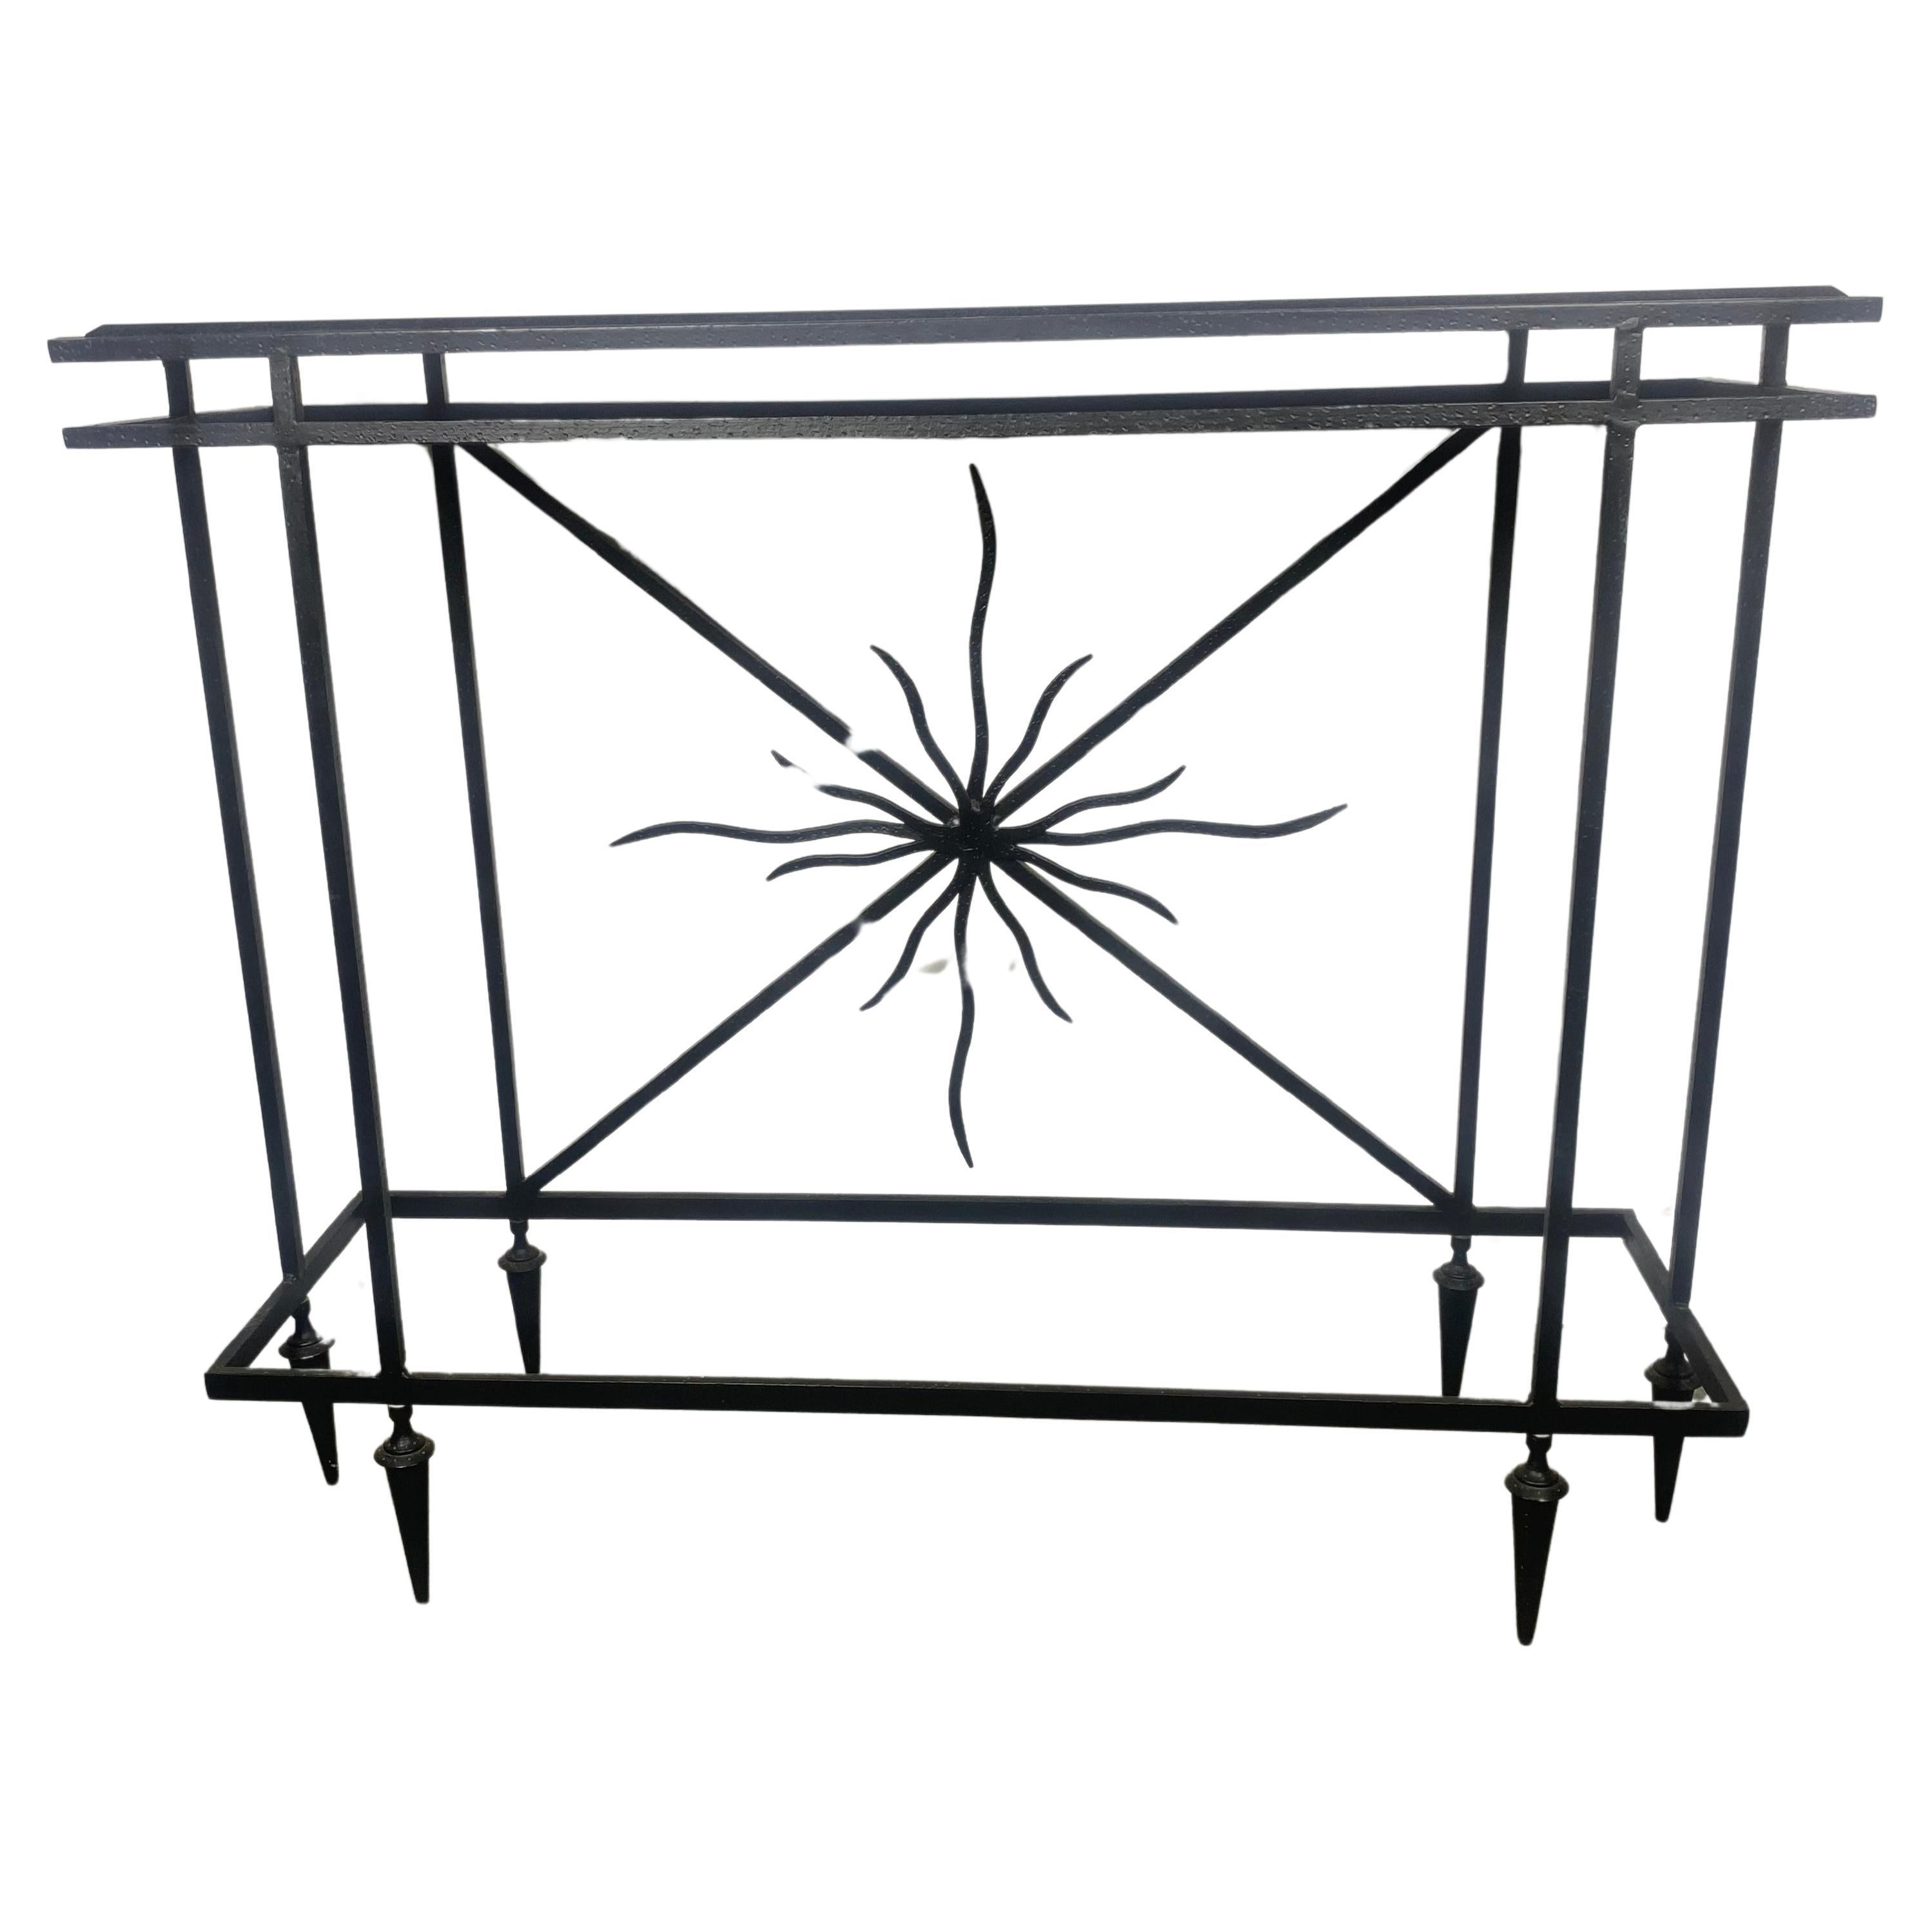 Italian Post Modernist Iron and Marble Console Table , manner of Gio Ponti